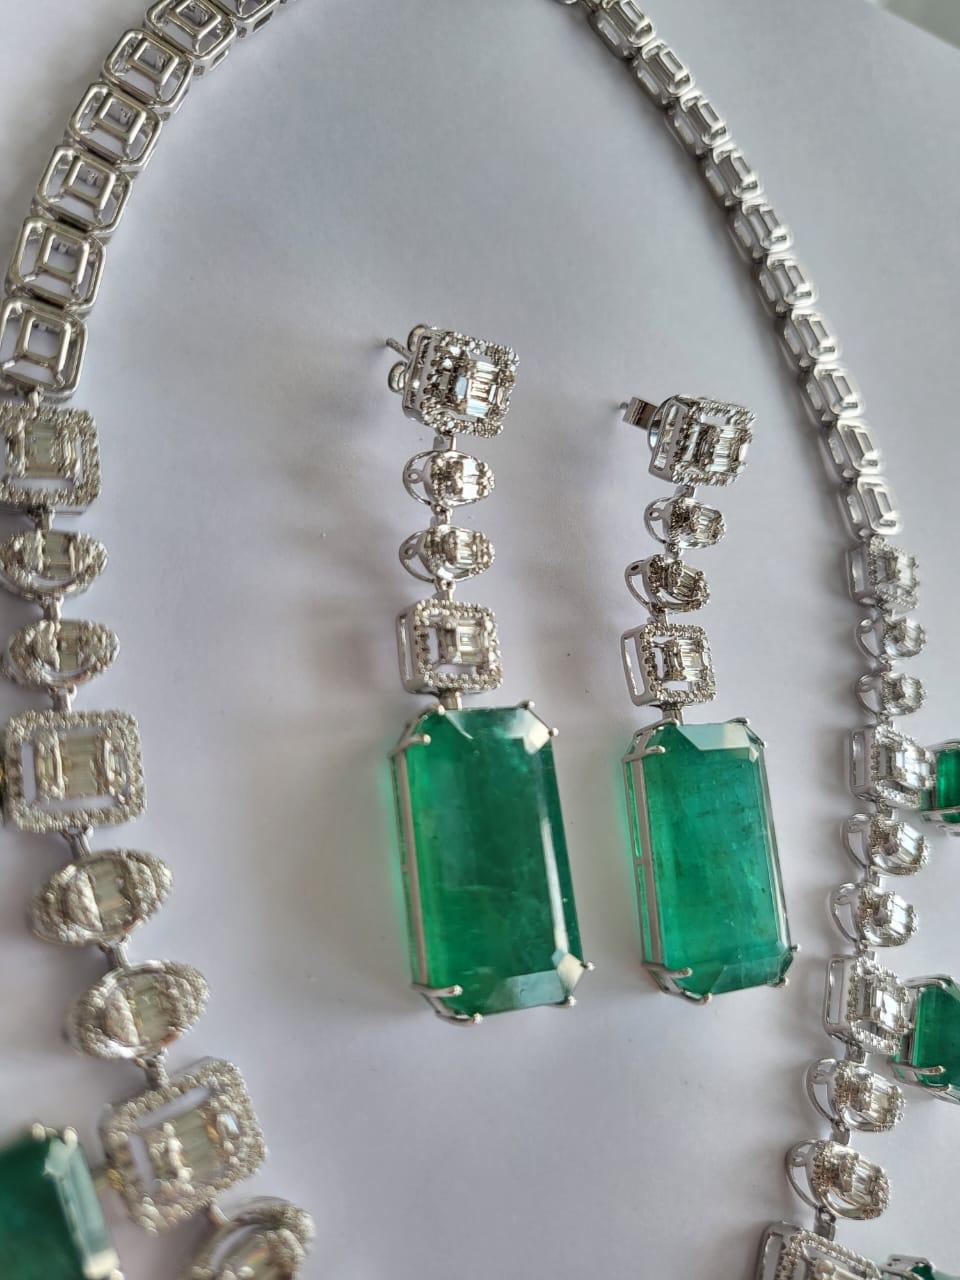 A very gorgeous and one of a kind, Emerald Necklace set in 18K White Gold & Diamonds. The weight of the Emeralds in the necklace is 54.94 carats. The weight of the Emeralds in the Earrings is 46.43 carats. The Emeralds are completely natural,